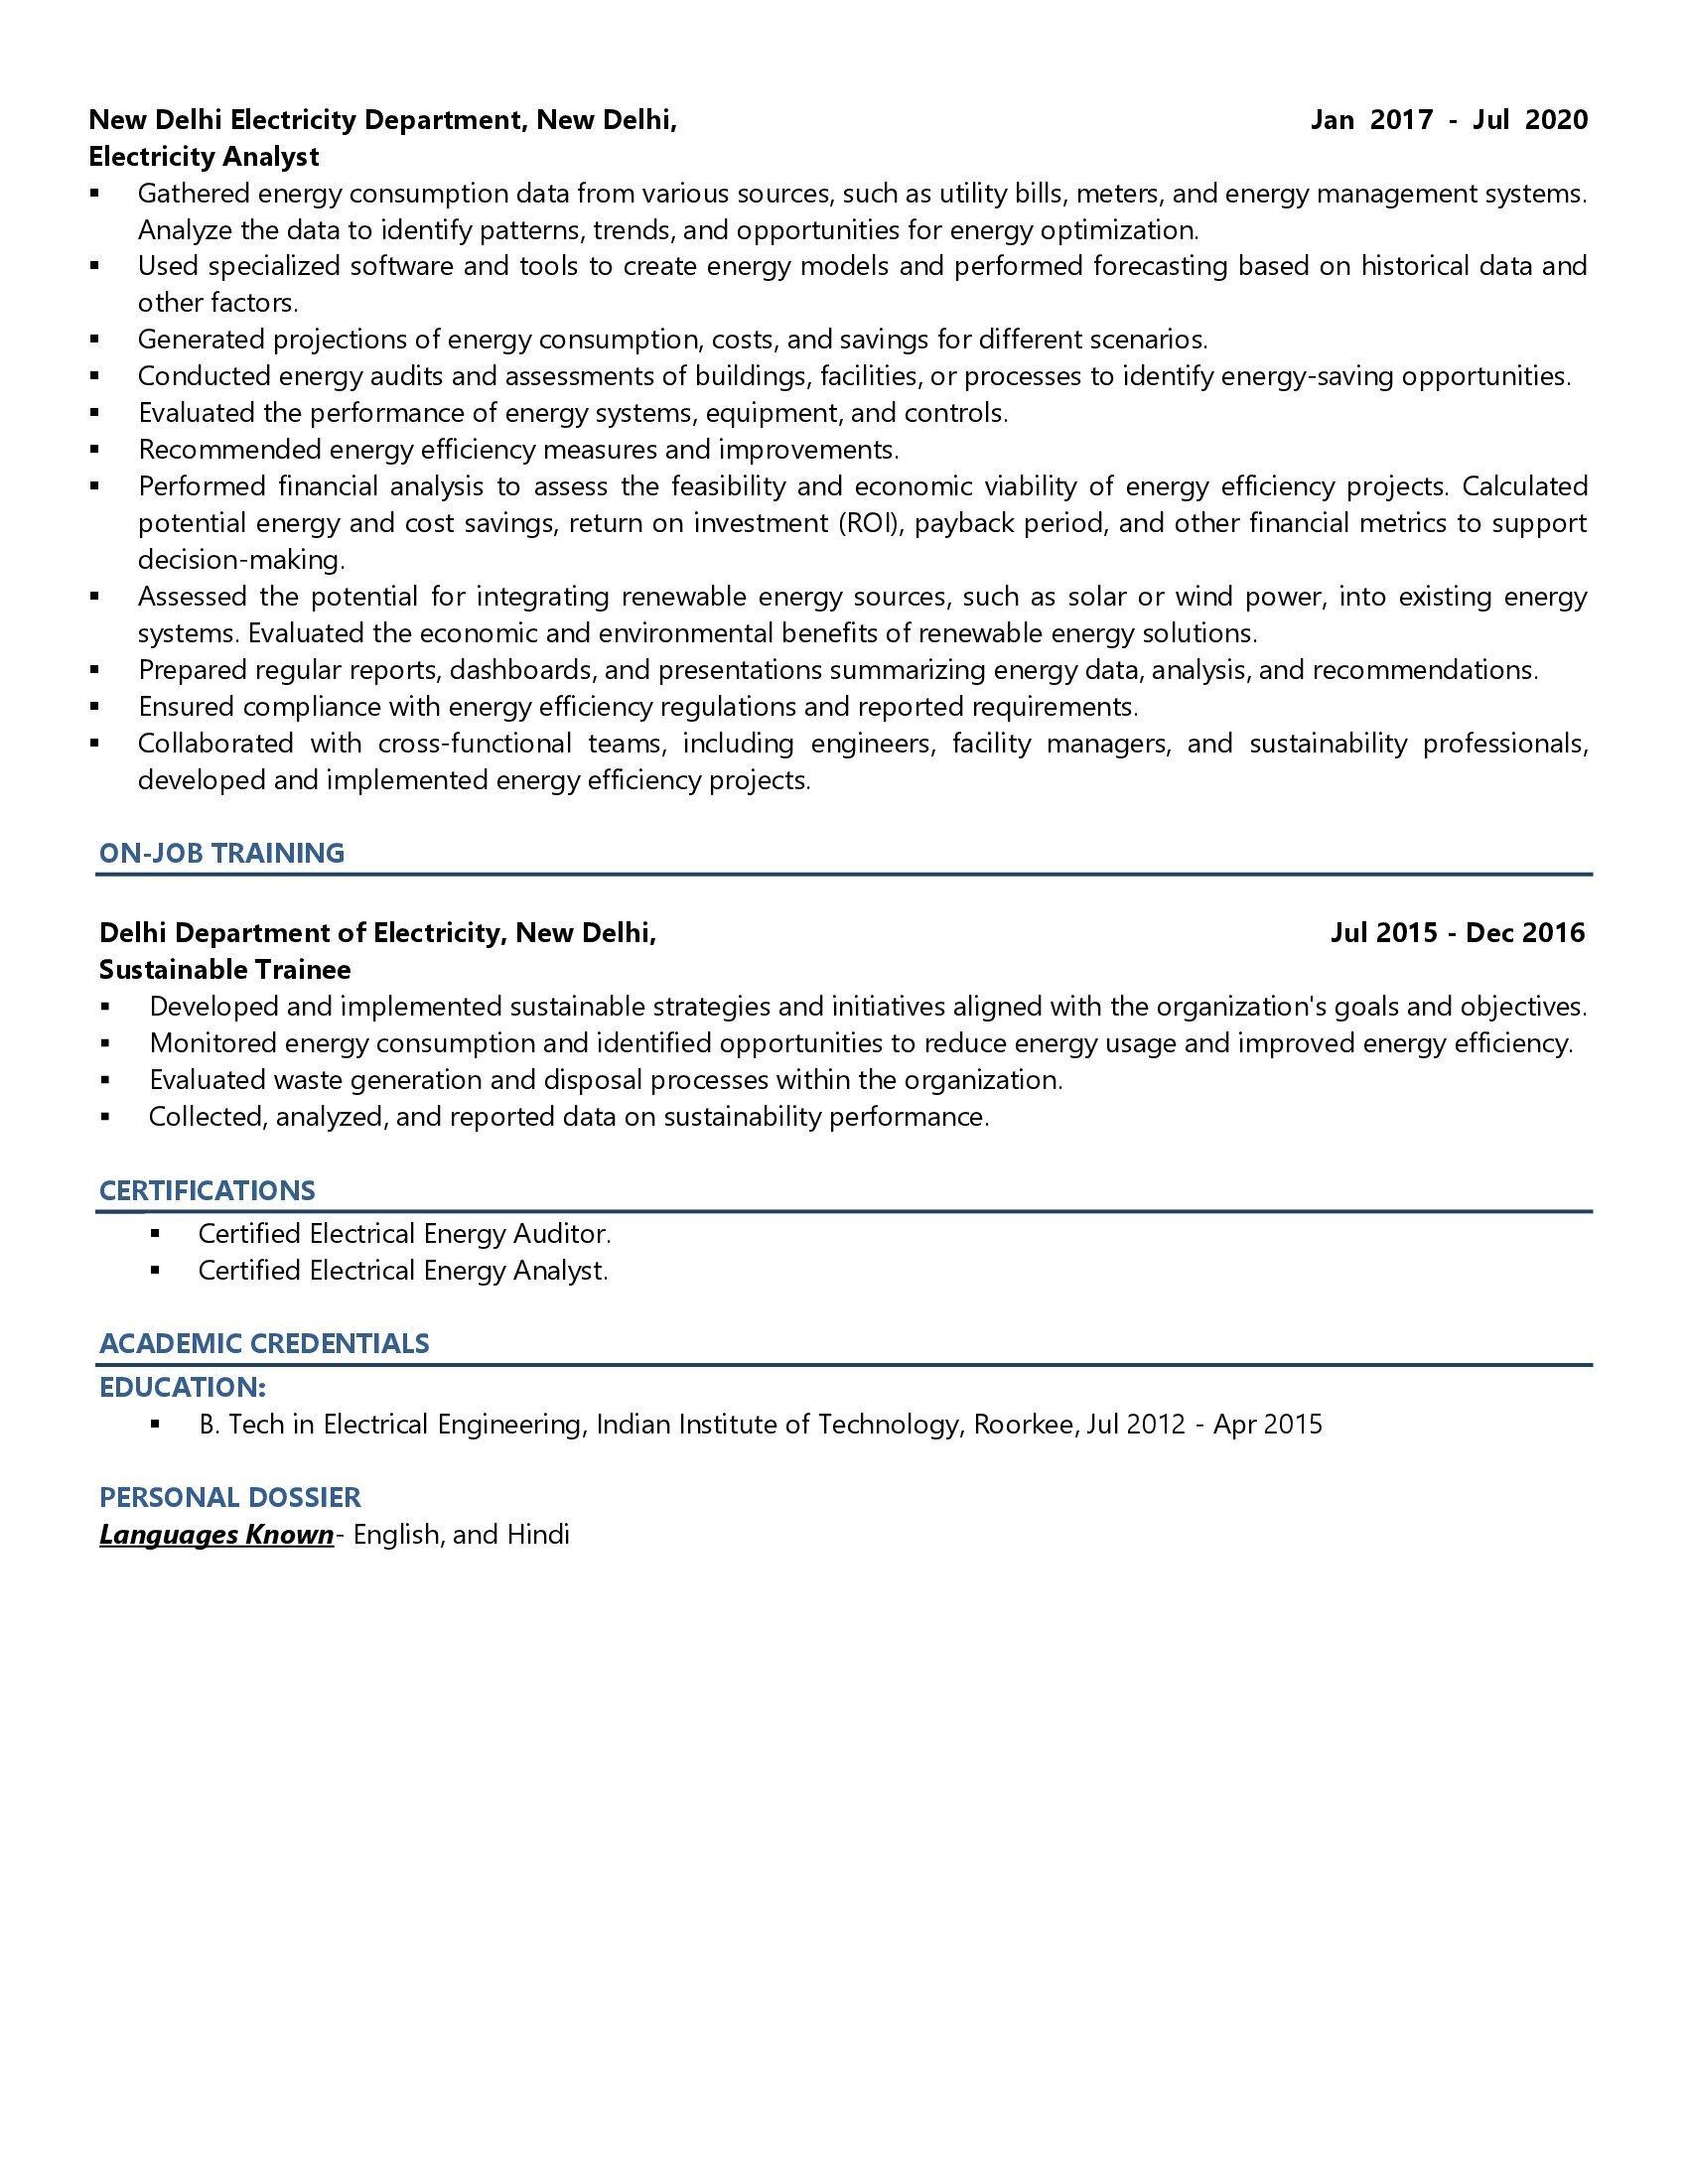 Electricity Consultant - Resume Example & Template